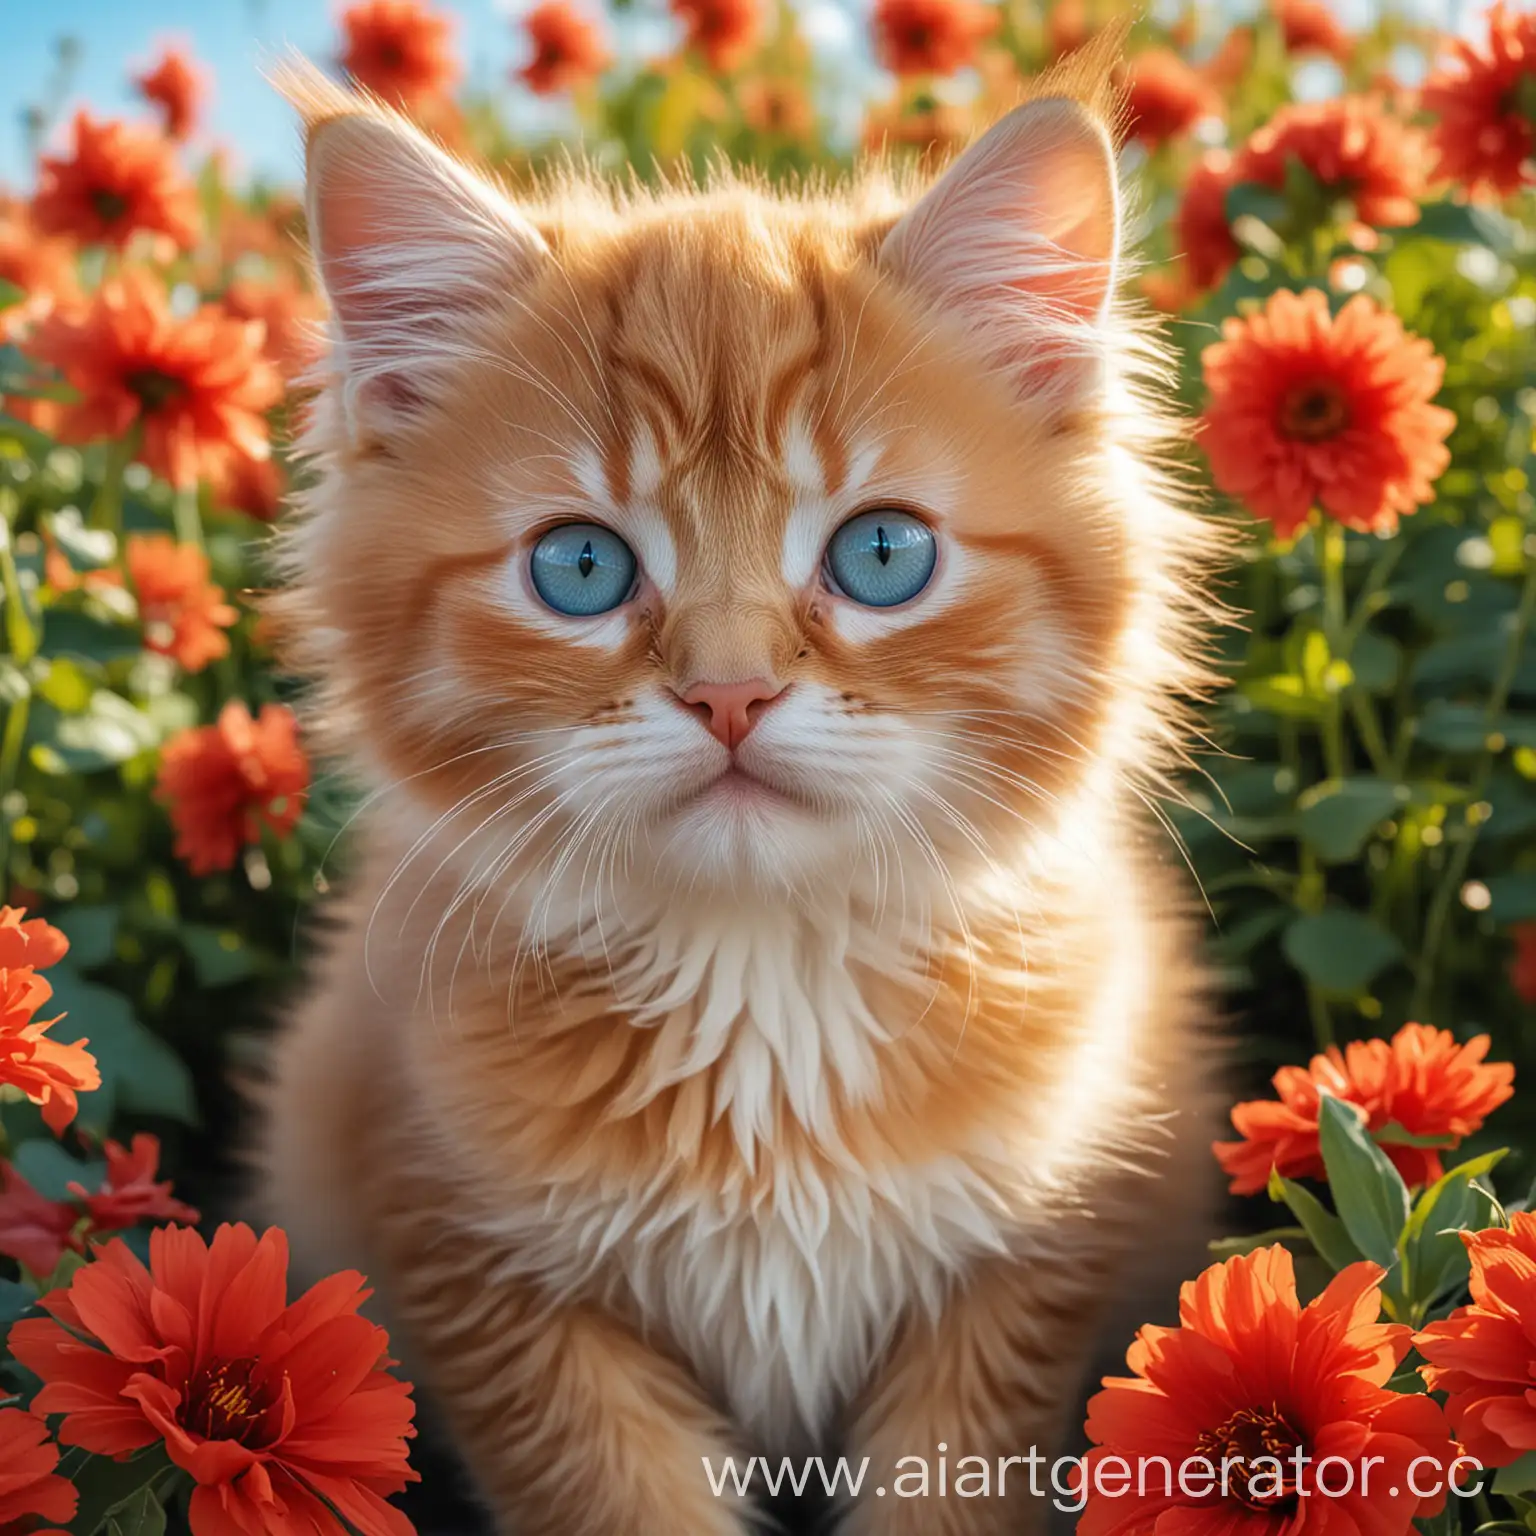 Adorable-Fluffy-Ginger-Kitten-Surrounded-by-Red-Flowers-under-a-Soft-Sunny-Sky